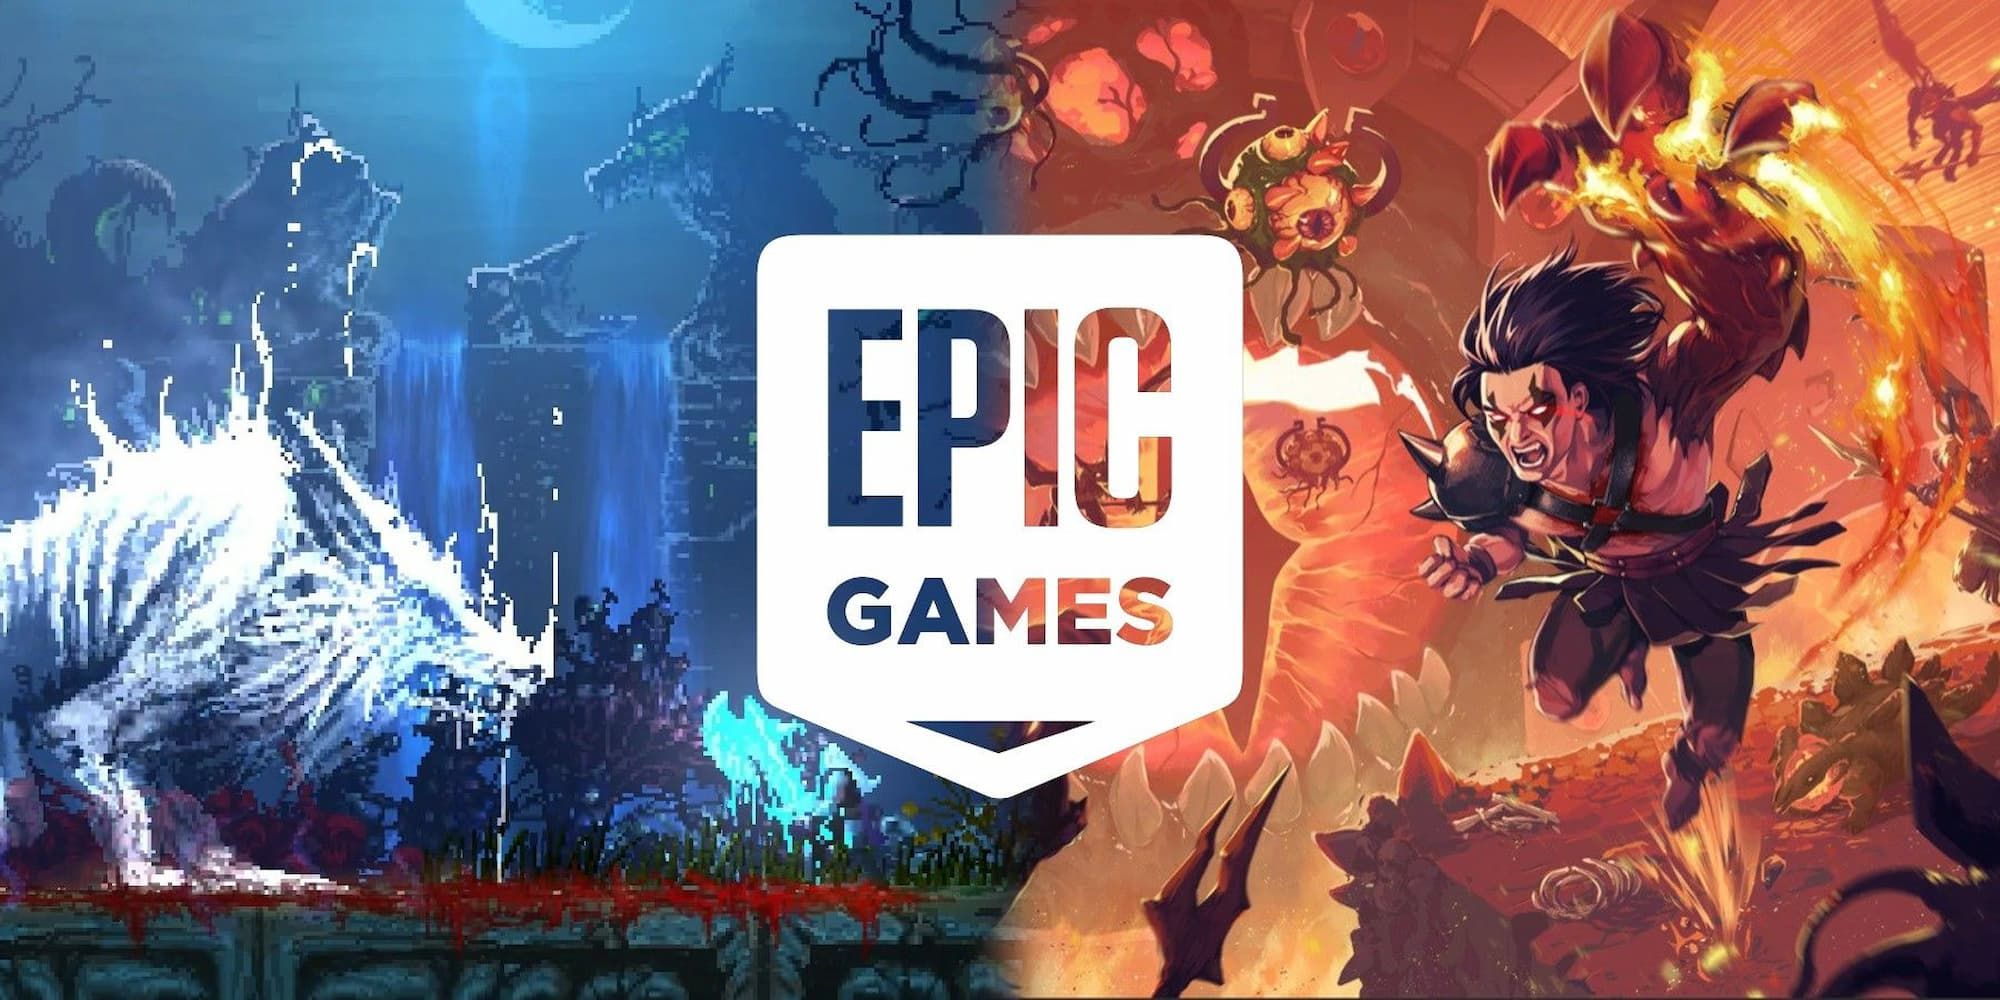 Free Games on Epic Store for March 16 Revealed